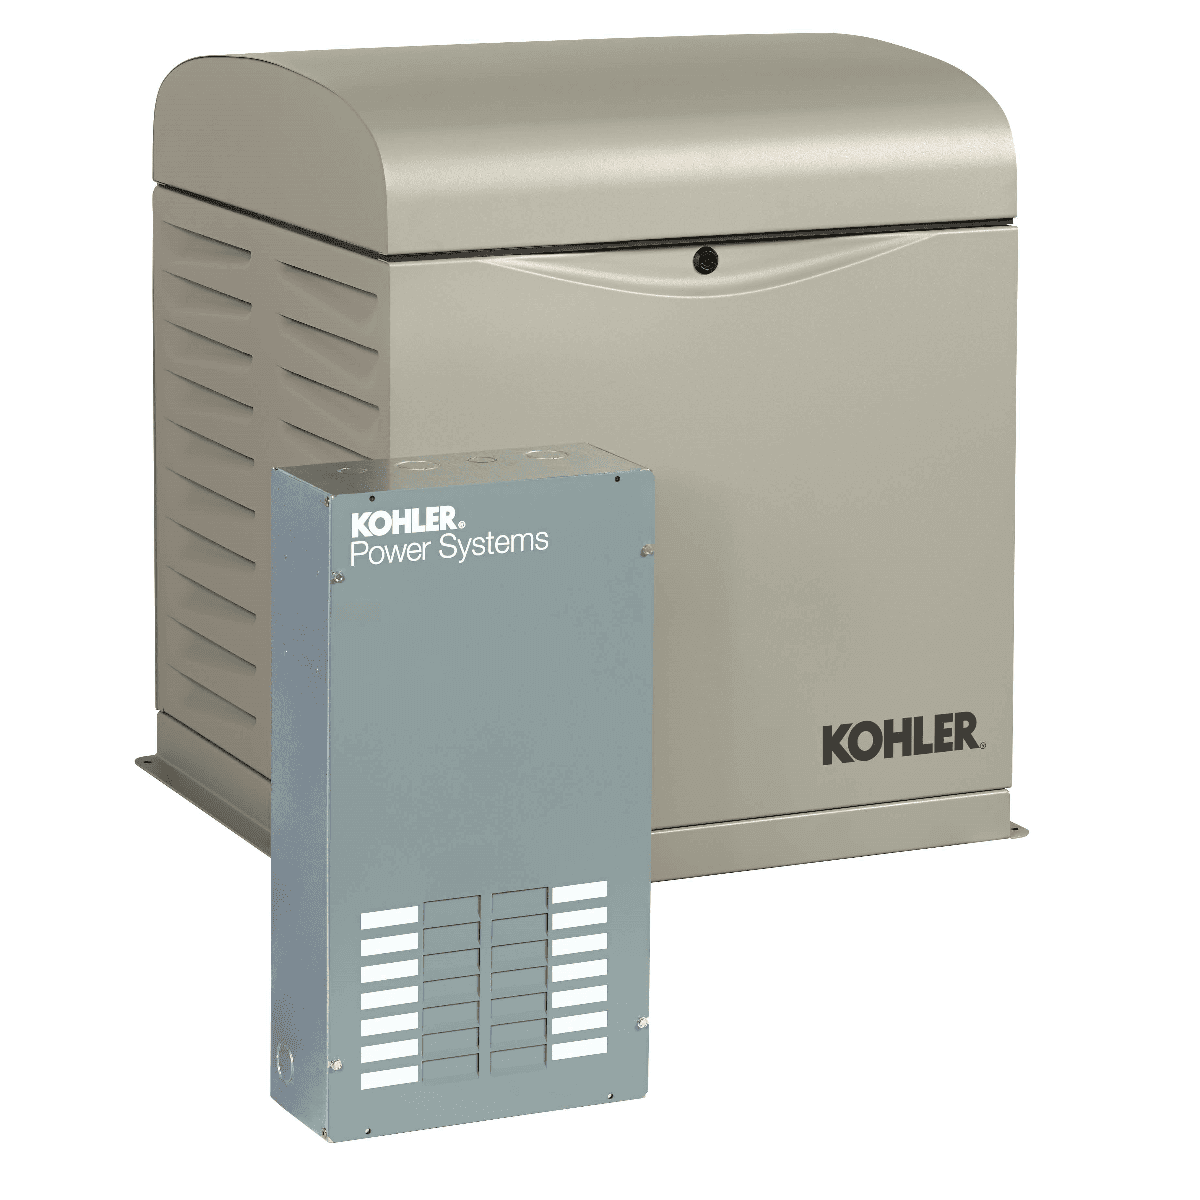 Product KOHLER RES SERIES 10-12KW STANDBY GENERATORS - Standby Generators in Rochester Syracuse & Buffalo NY image